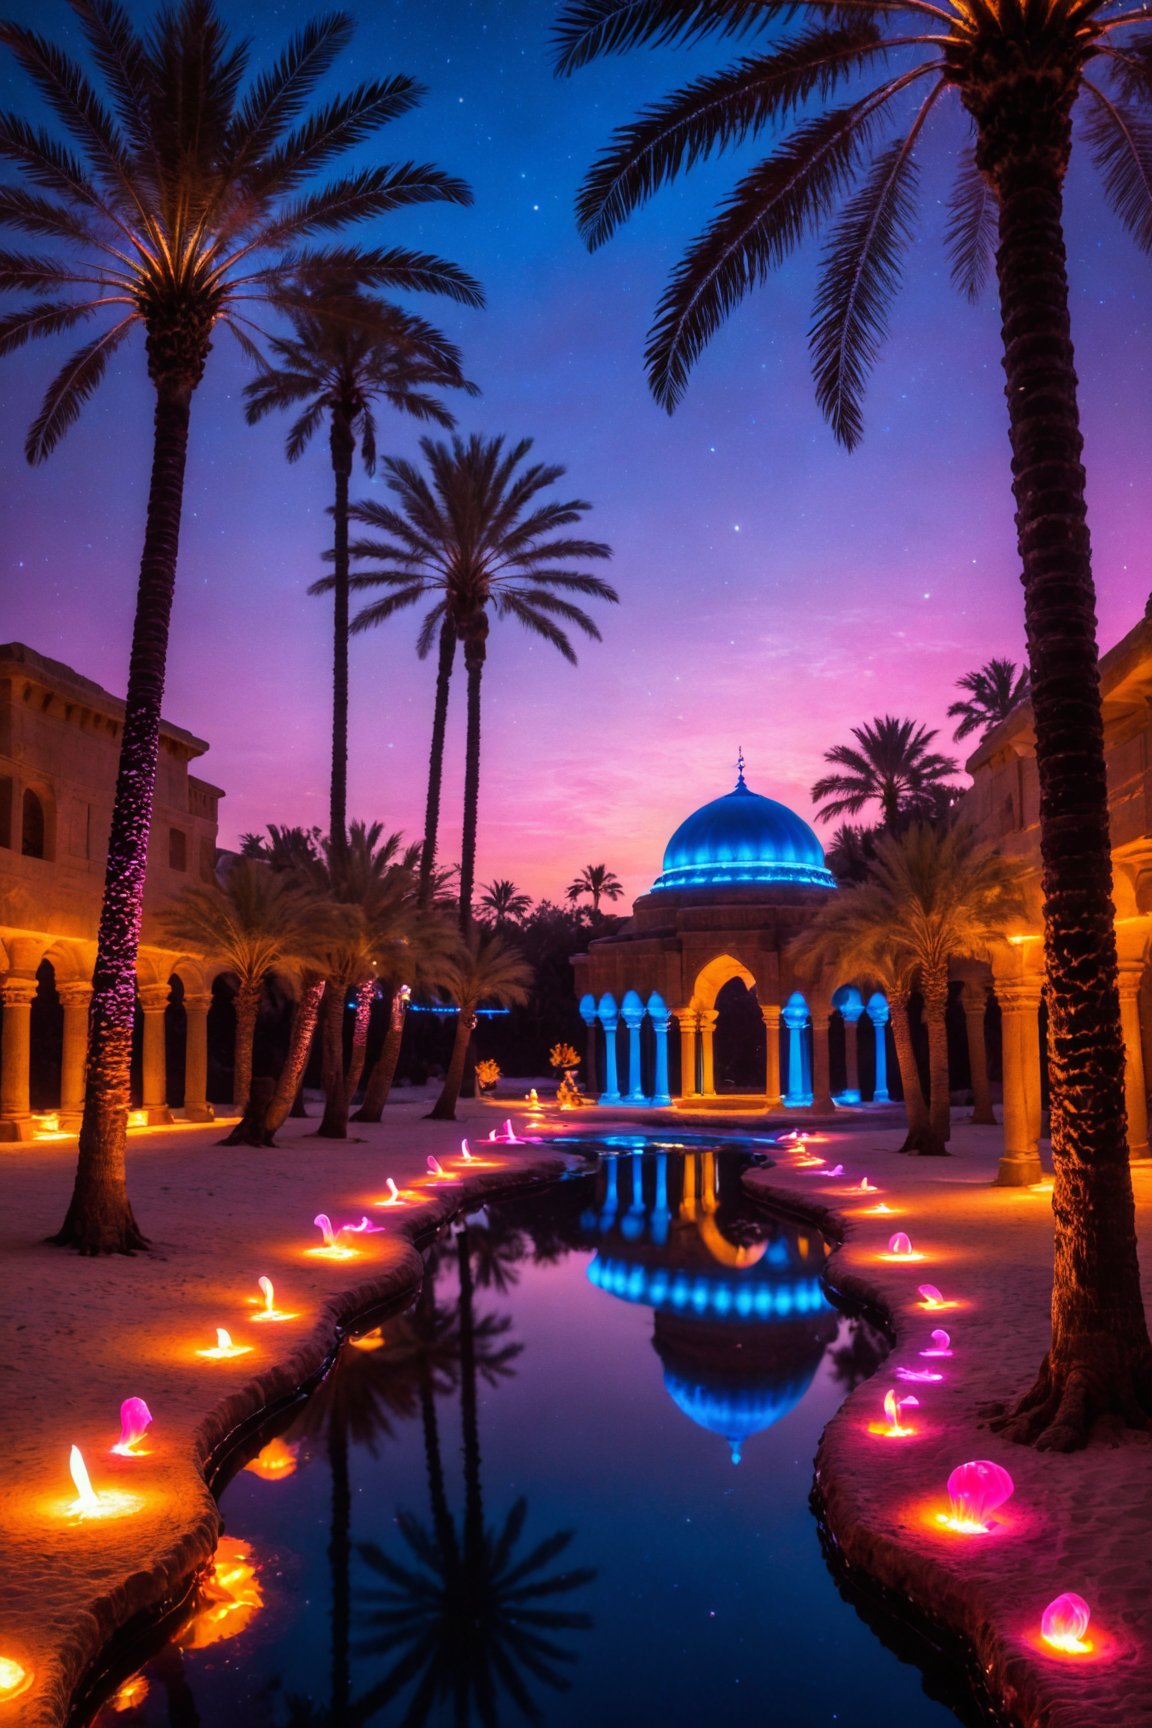 Scenic Islamic garden with palm trees




